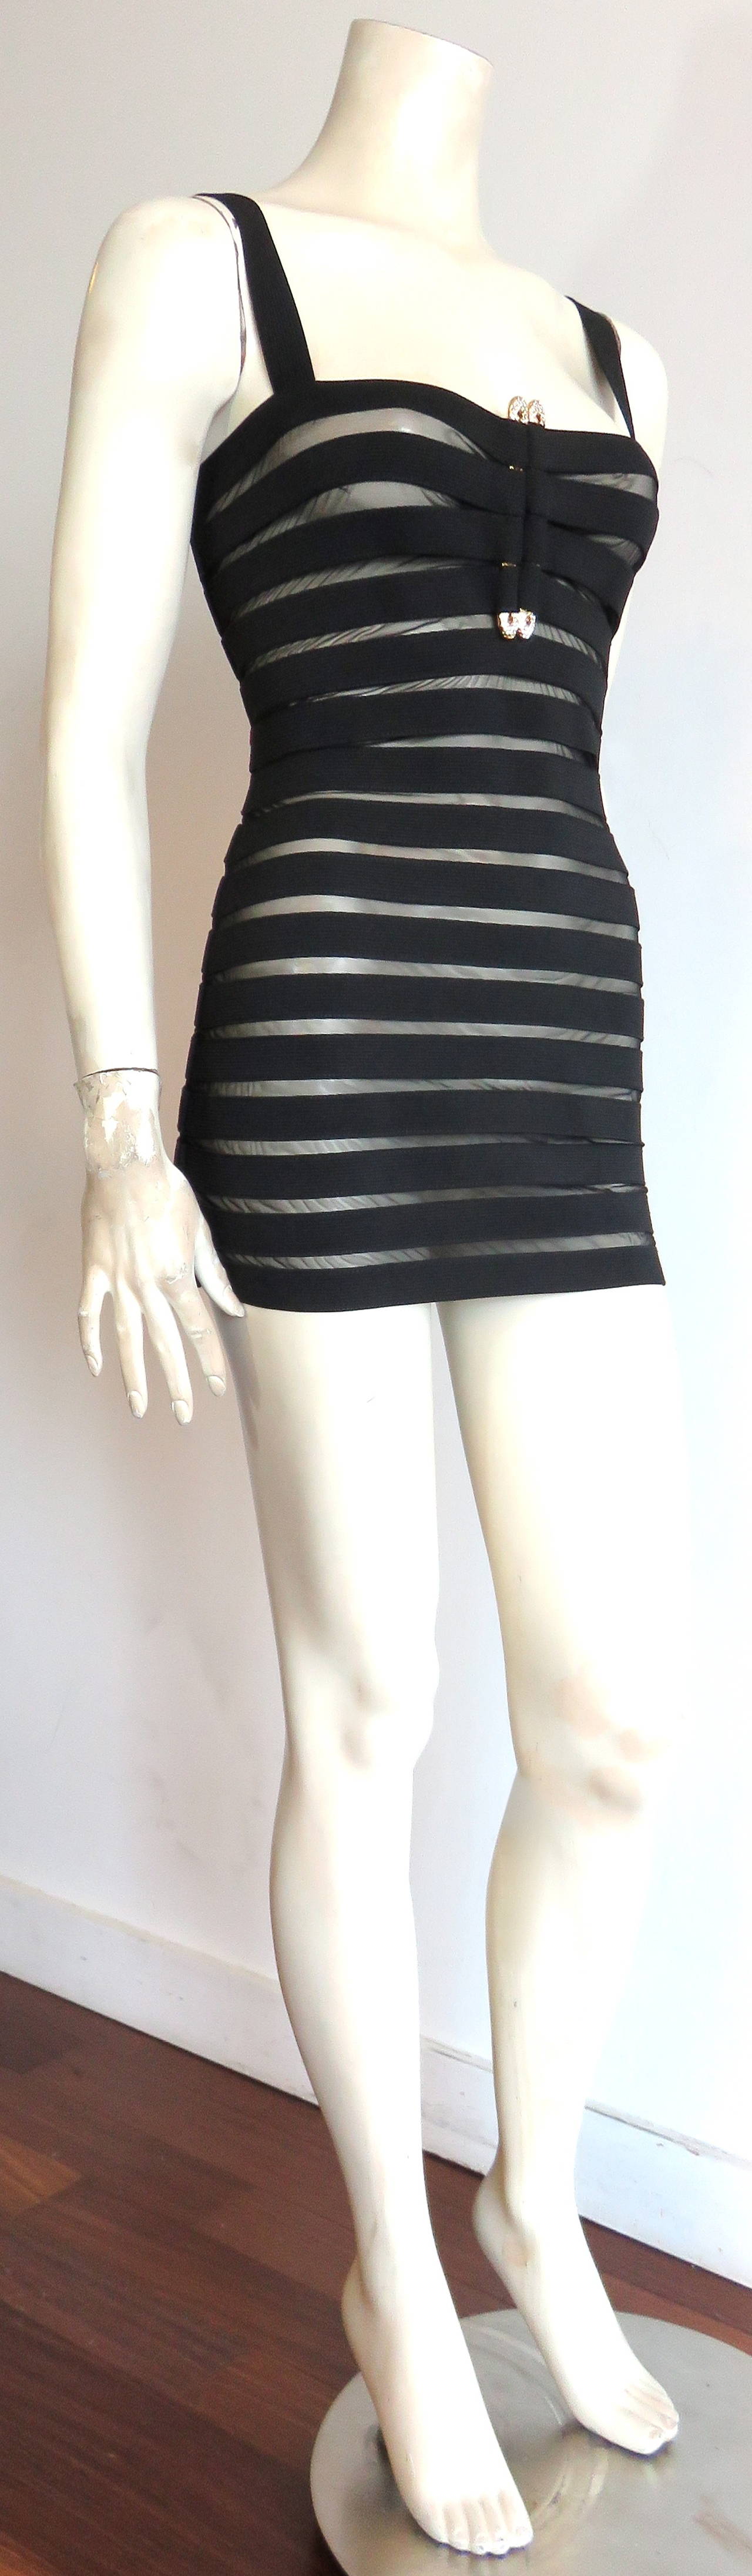 Excellent condition, 1980's GIANFRANCO FERRE, semi-sheer bandage mico-mini dress.

This sexy, semi-sheer, elastic dress can be worn in several ways.  It can be worn over swimwear as a chic, poolside 'cover-up', or over tight leggings, and a tube